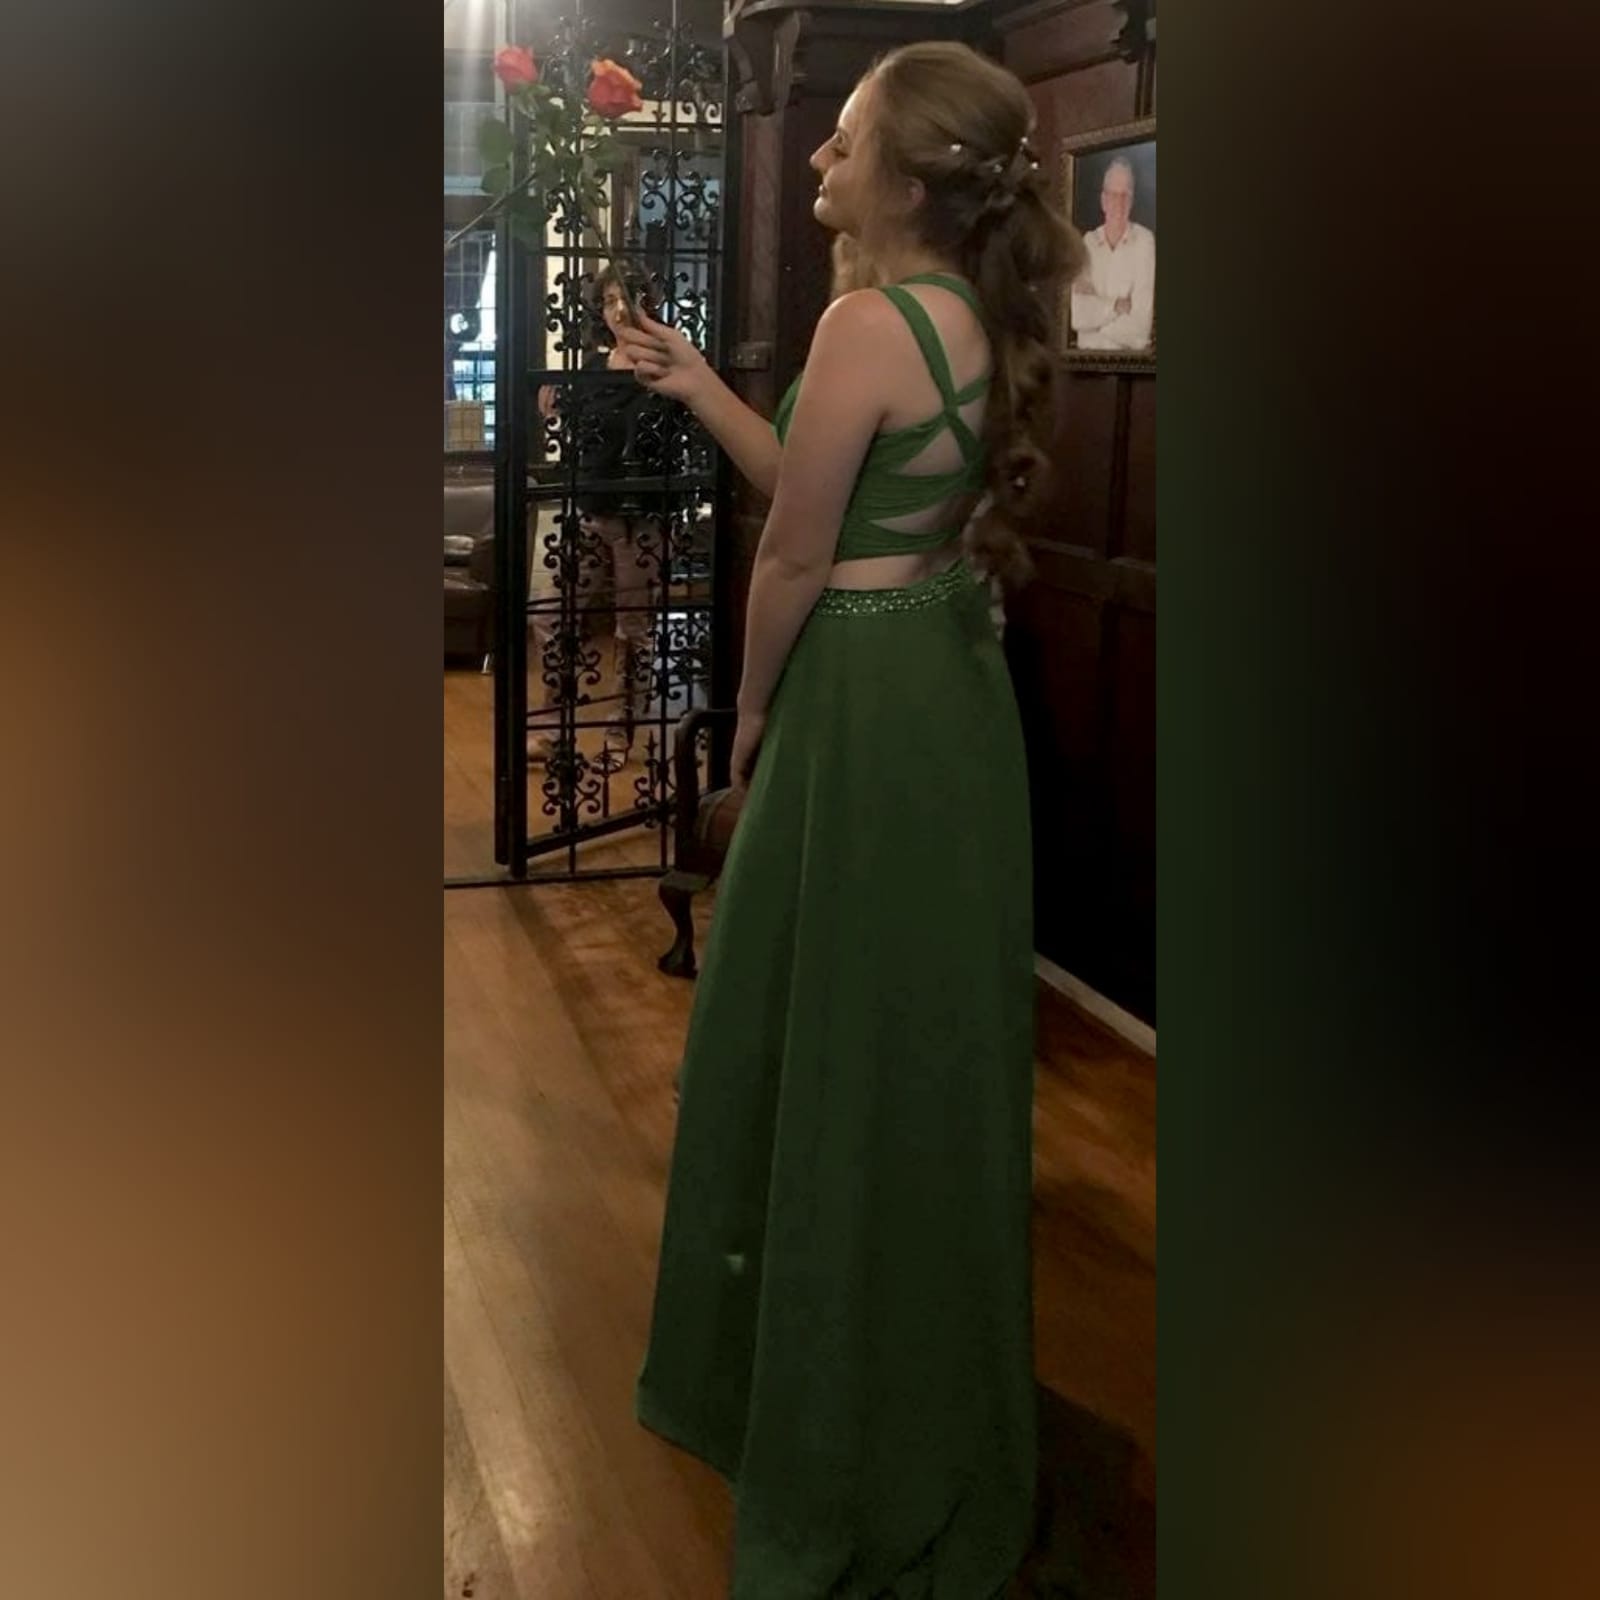 Olive green 2 piece prom dress 5 olive green 2 piece prom dress. Flowy long chiffon shirt with a little train and waistband detailed with silver beads. Pleated crop top with a rounded deep neckline , backless design with strap detail.